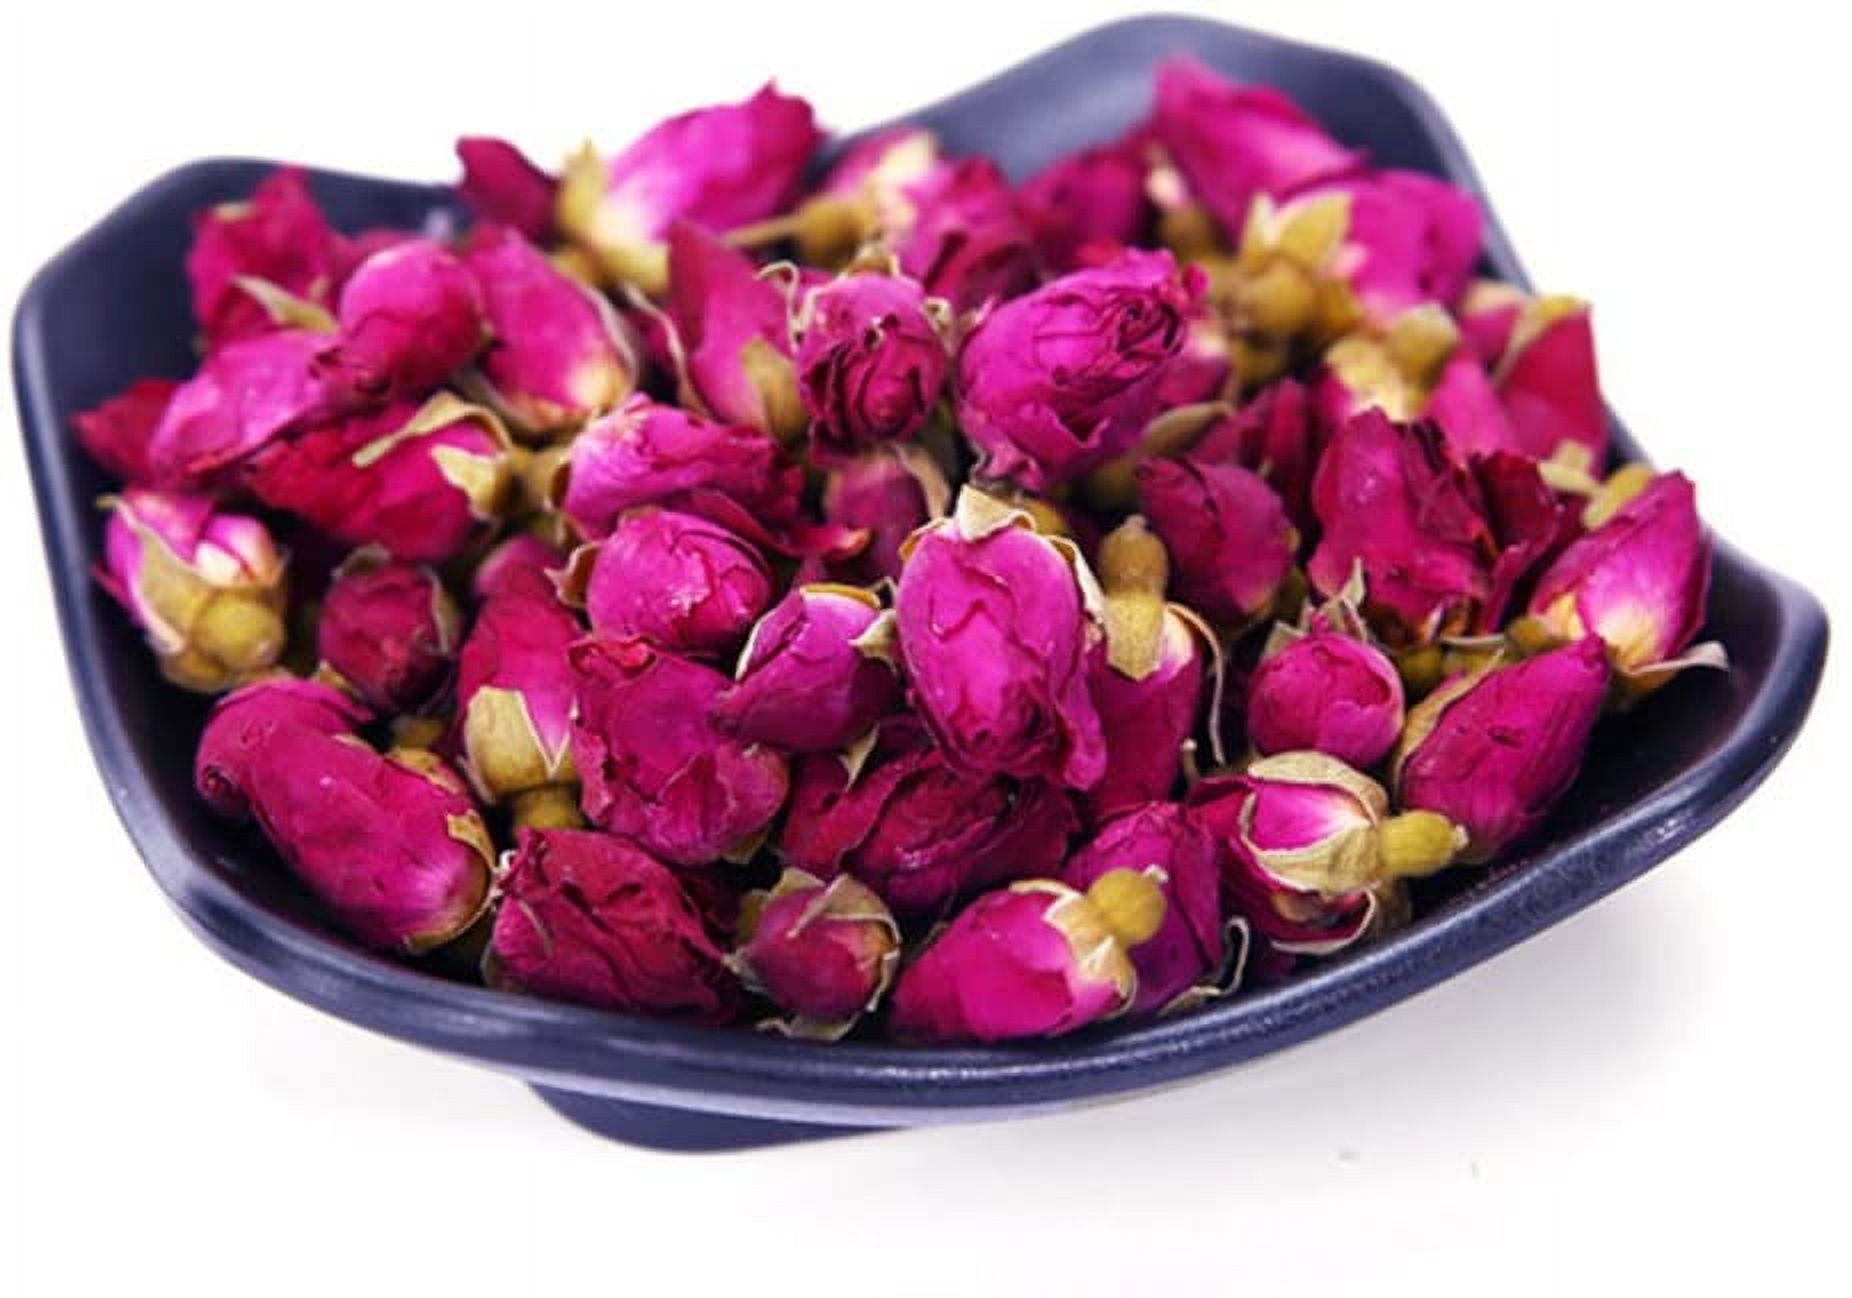 Red Rose Petals - Pure, All Natural & Edible Rose Petals - Dried Flower  Petals for Herbal Tea, Decoration, Rose Sprinkles, Topping on Cupcakes